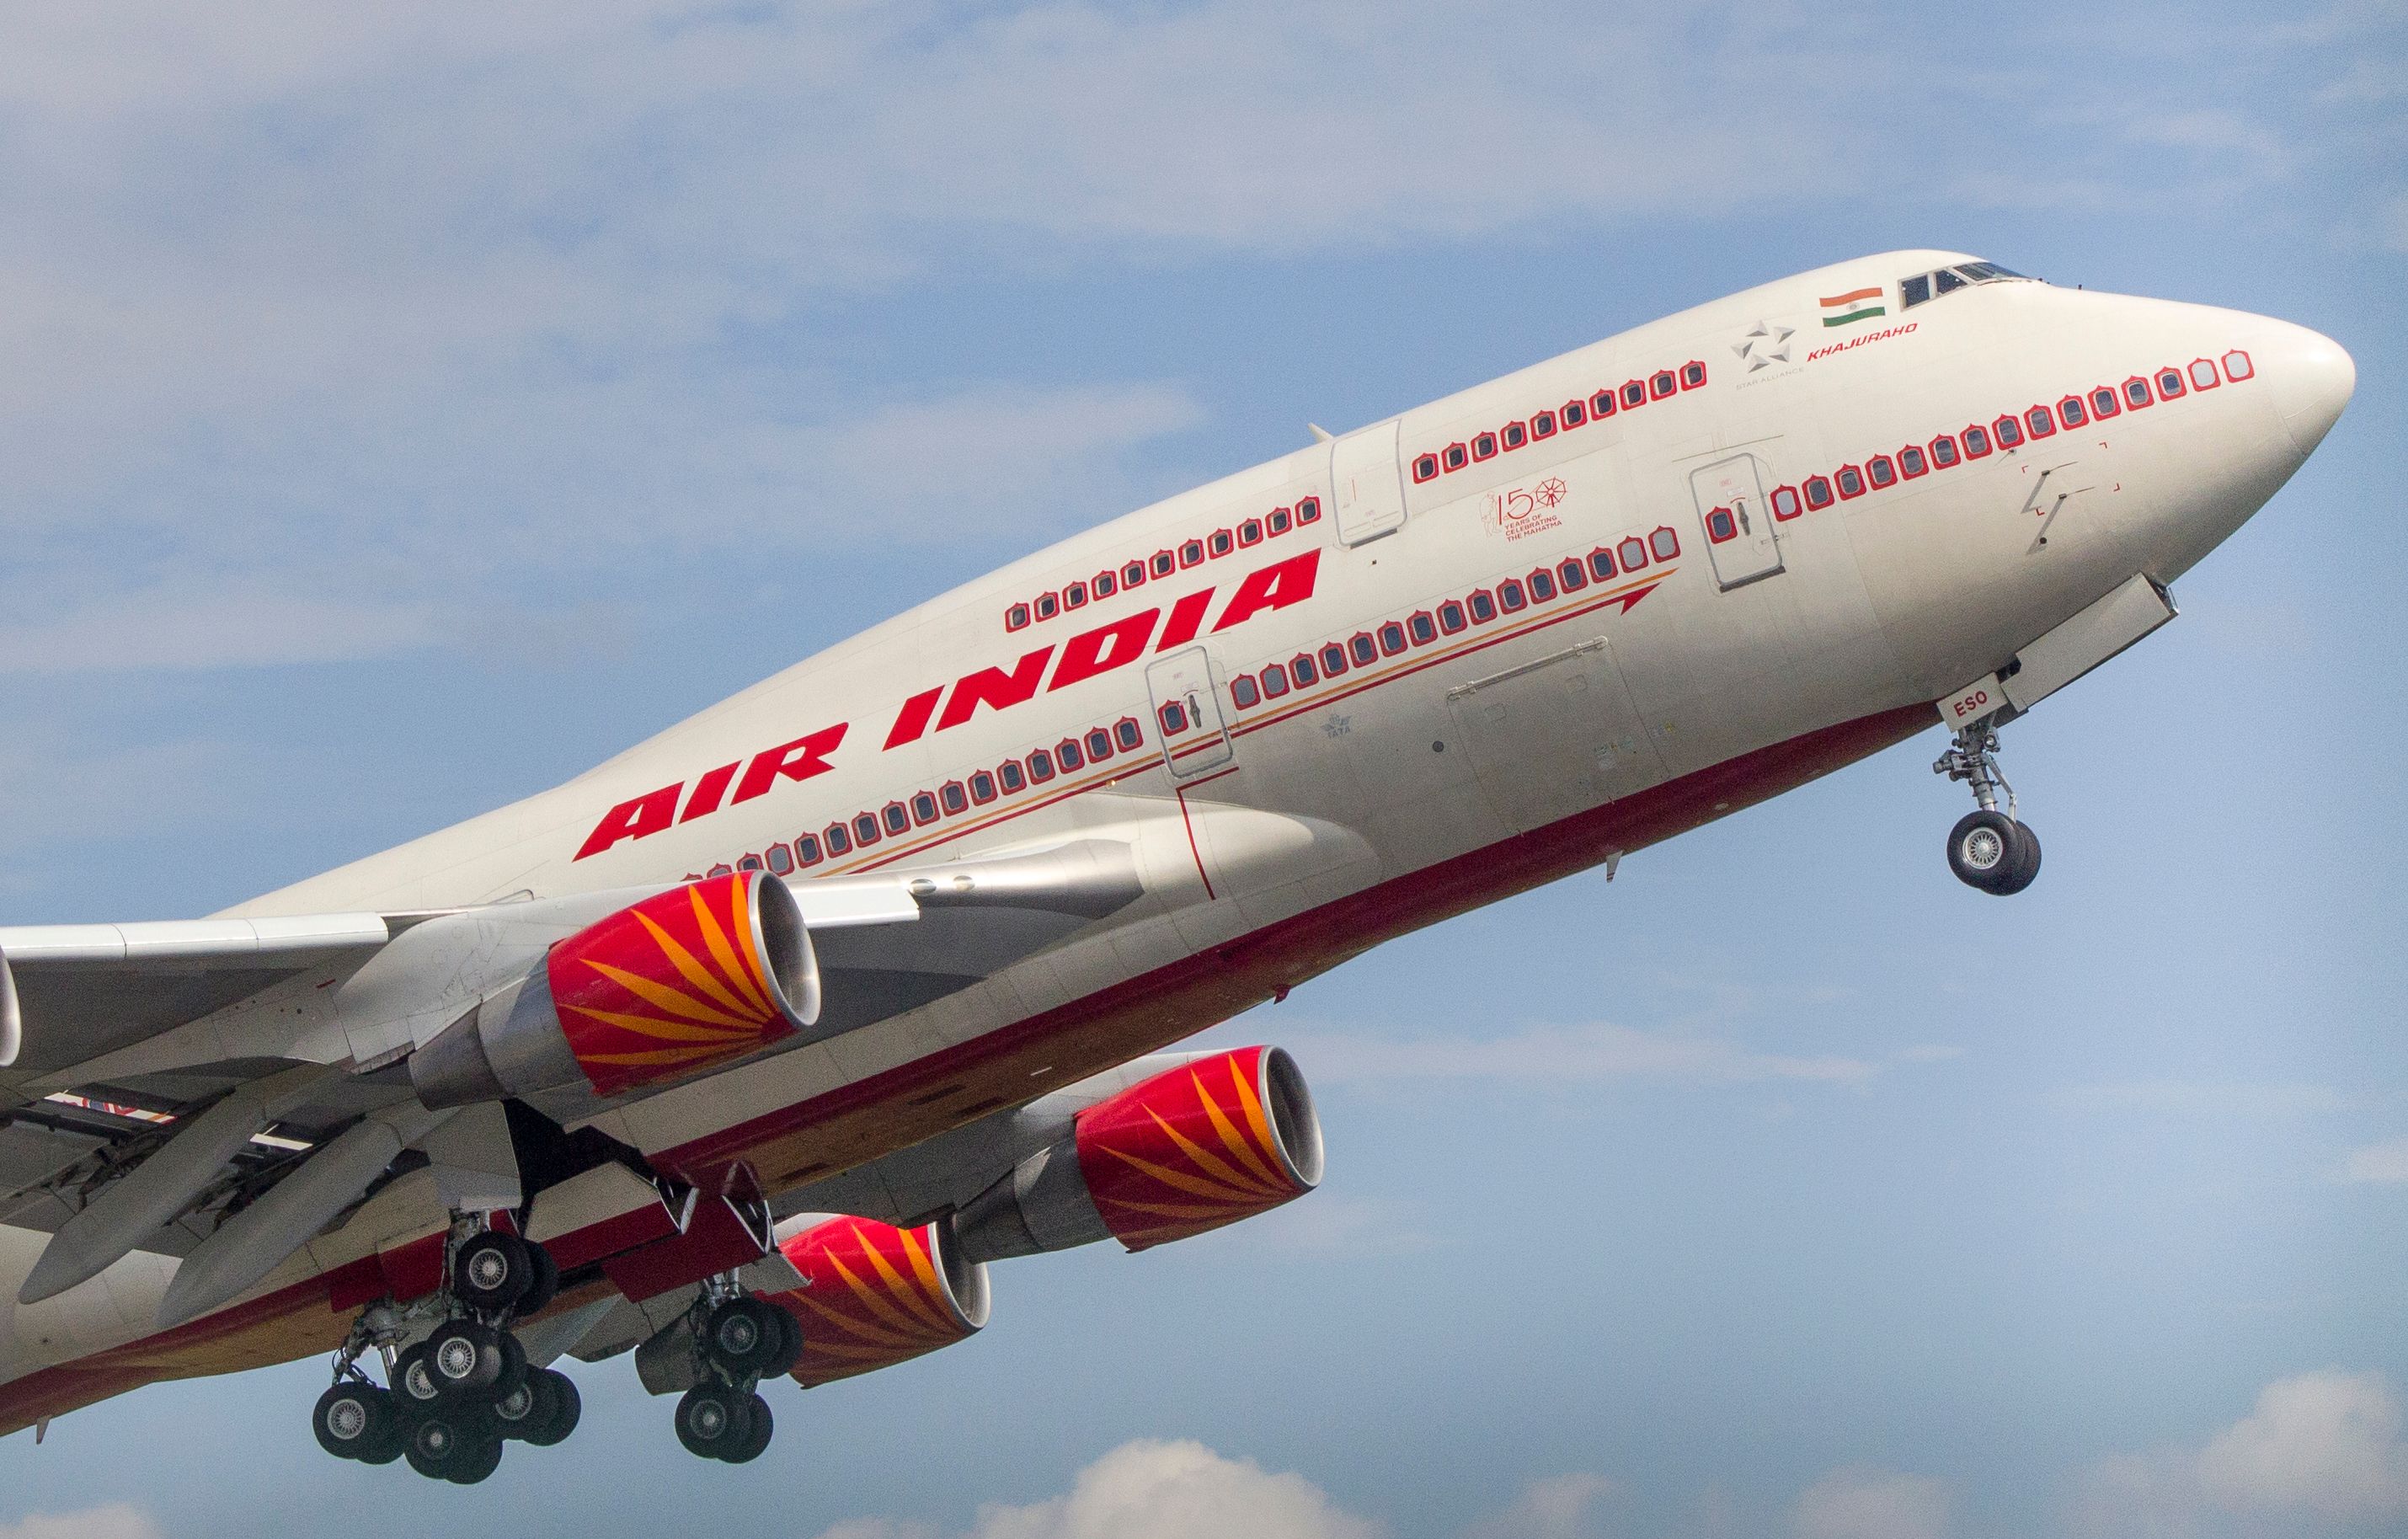 An Air India Boeing 747 flying in the sky.